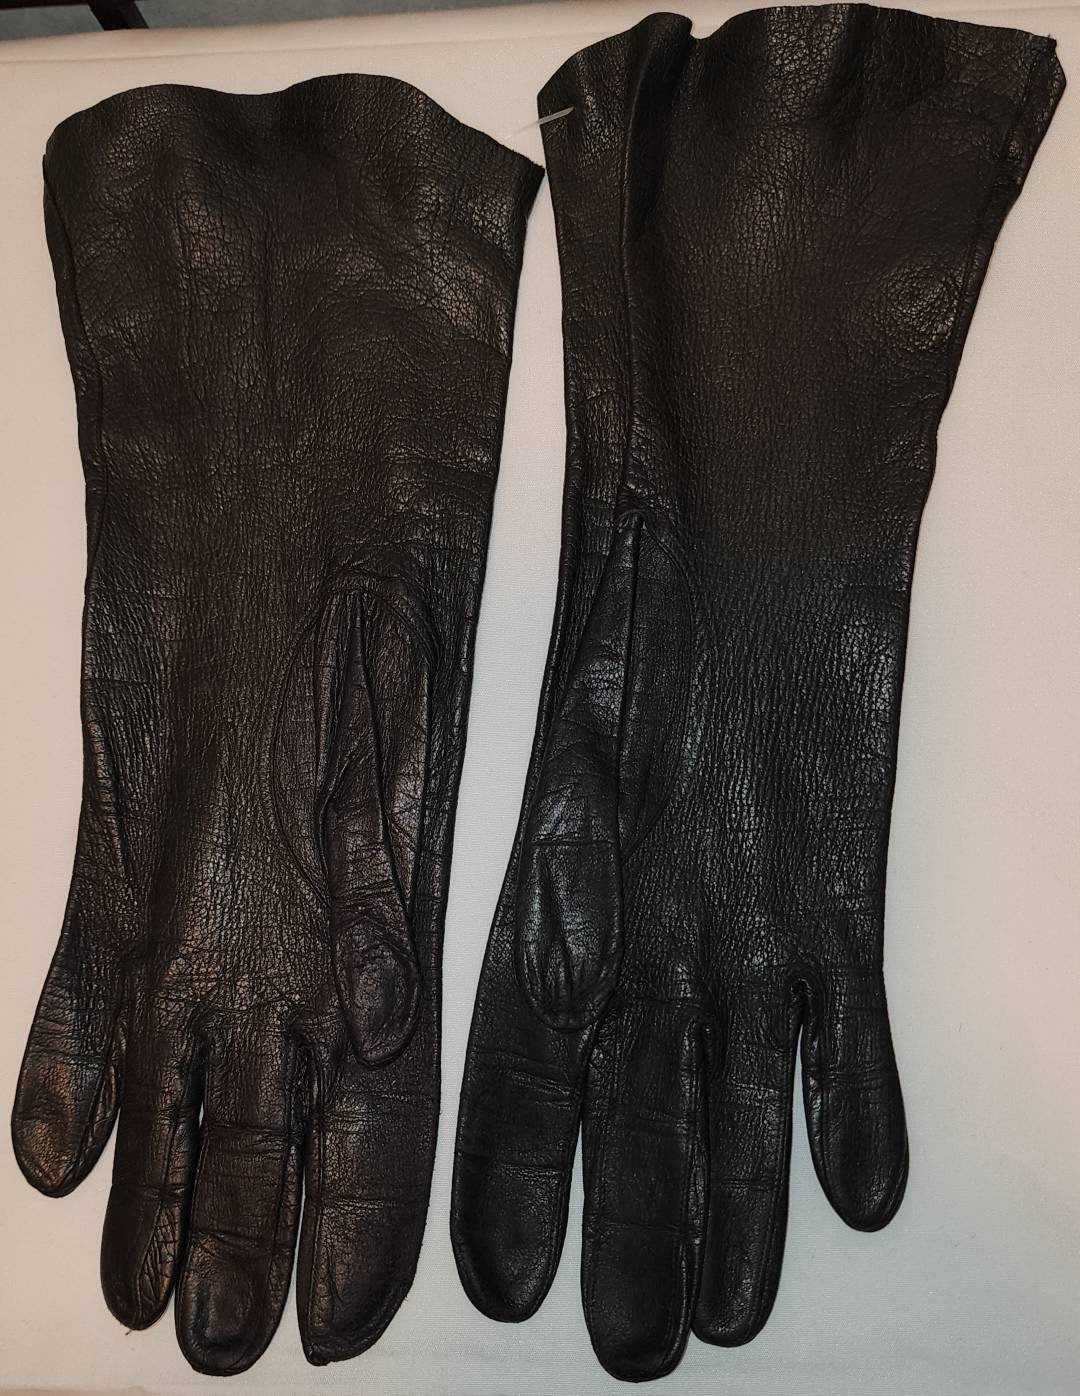 Vintage Leather Gloves 1950s Thin Black Midlength Leather Gloves Mid Century Rockabilly S